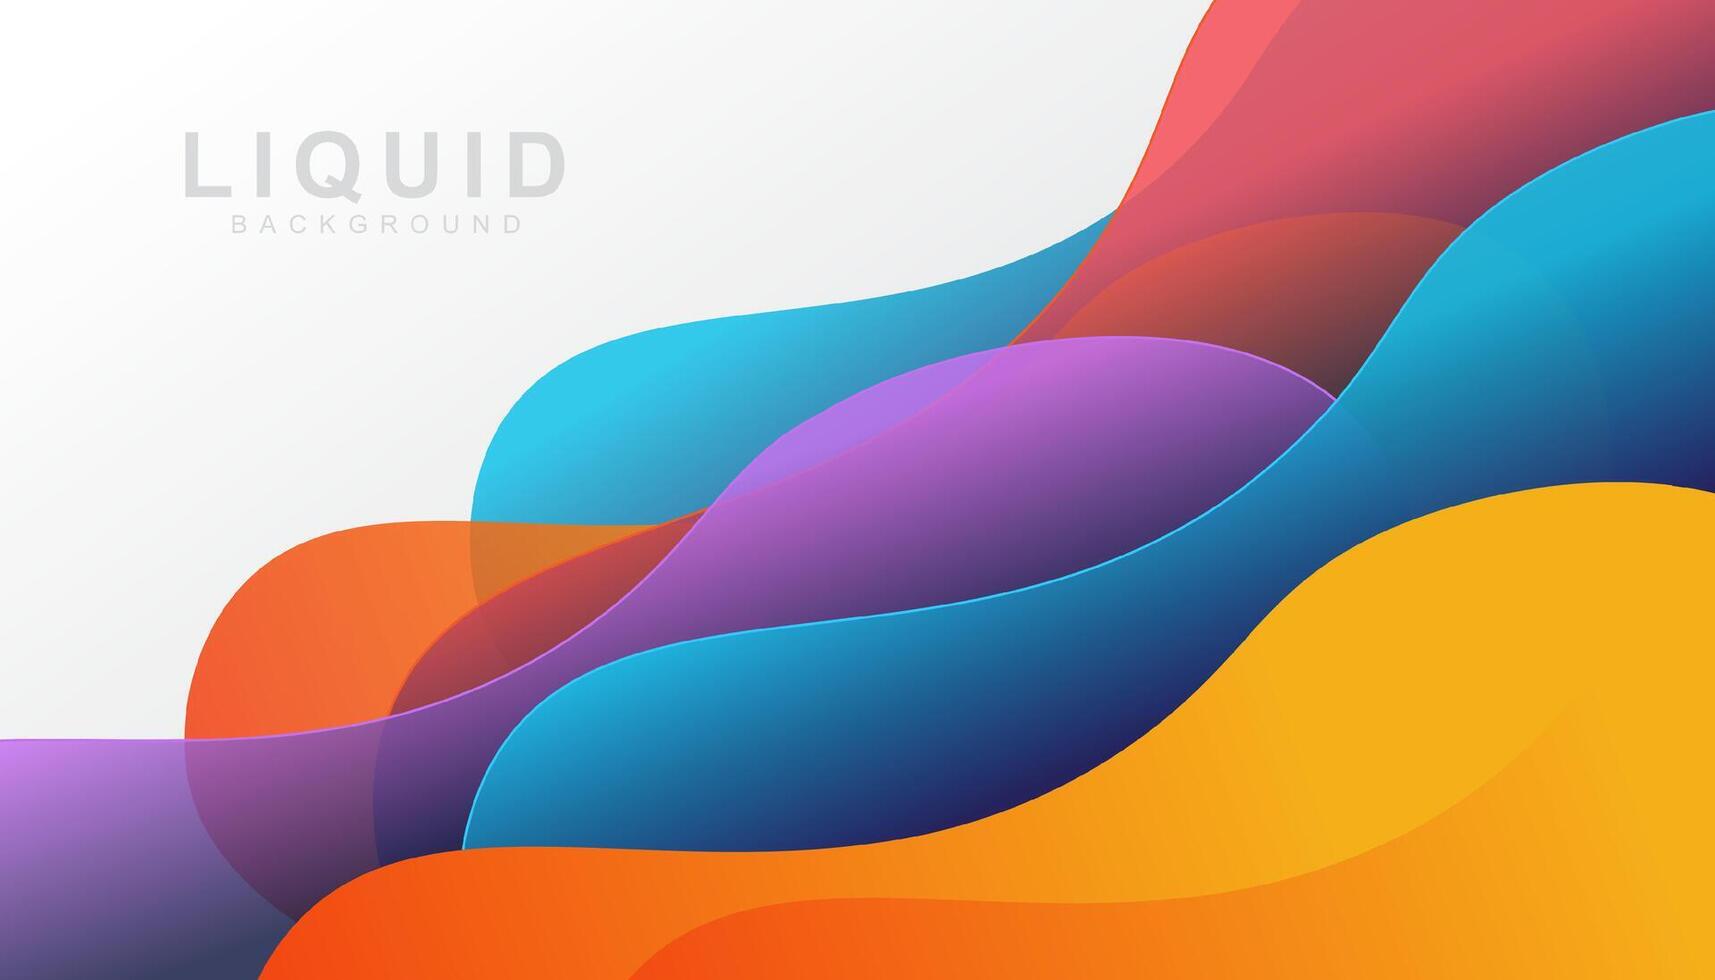 Liquid color background design with trendy shapes composition futuristic design background vector